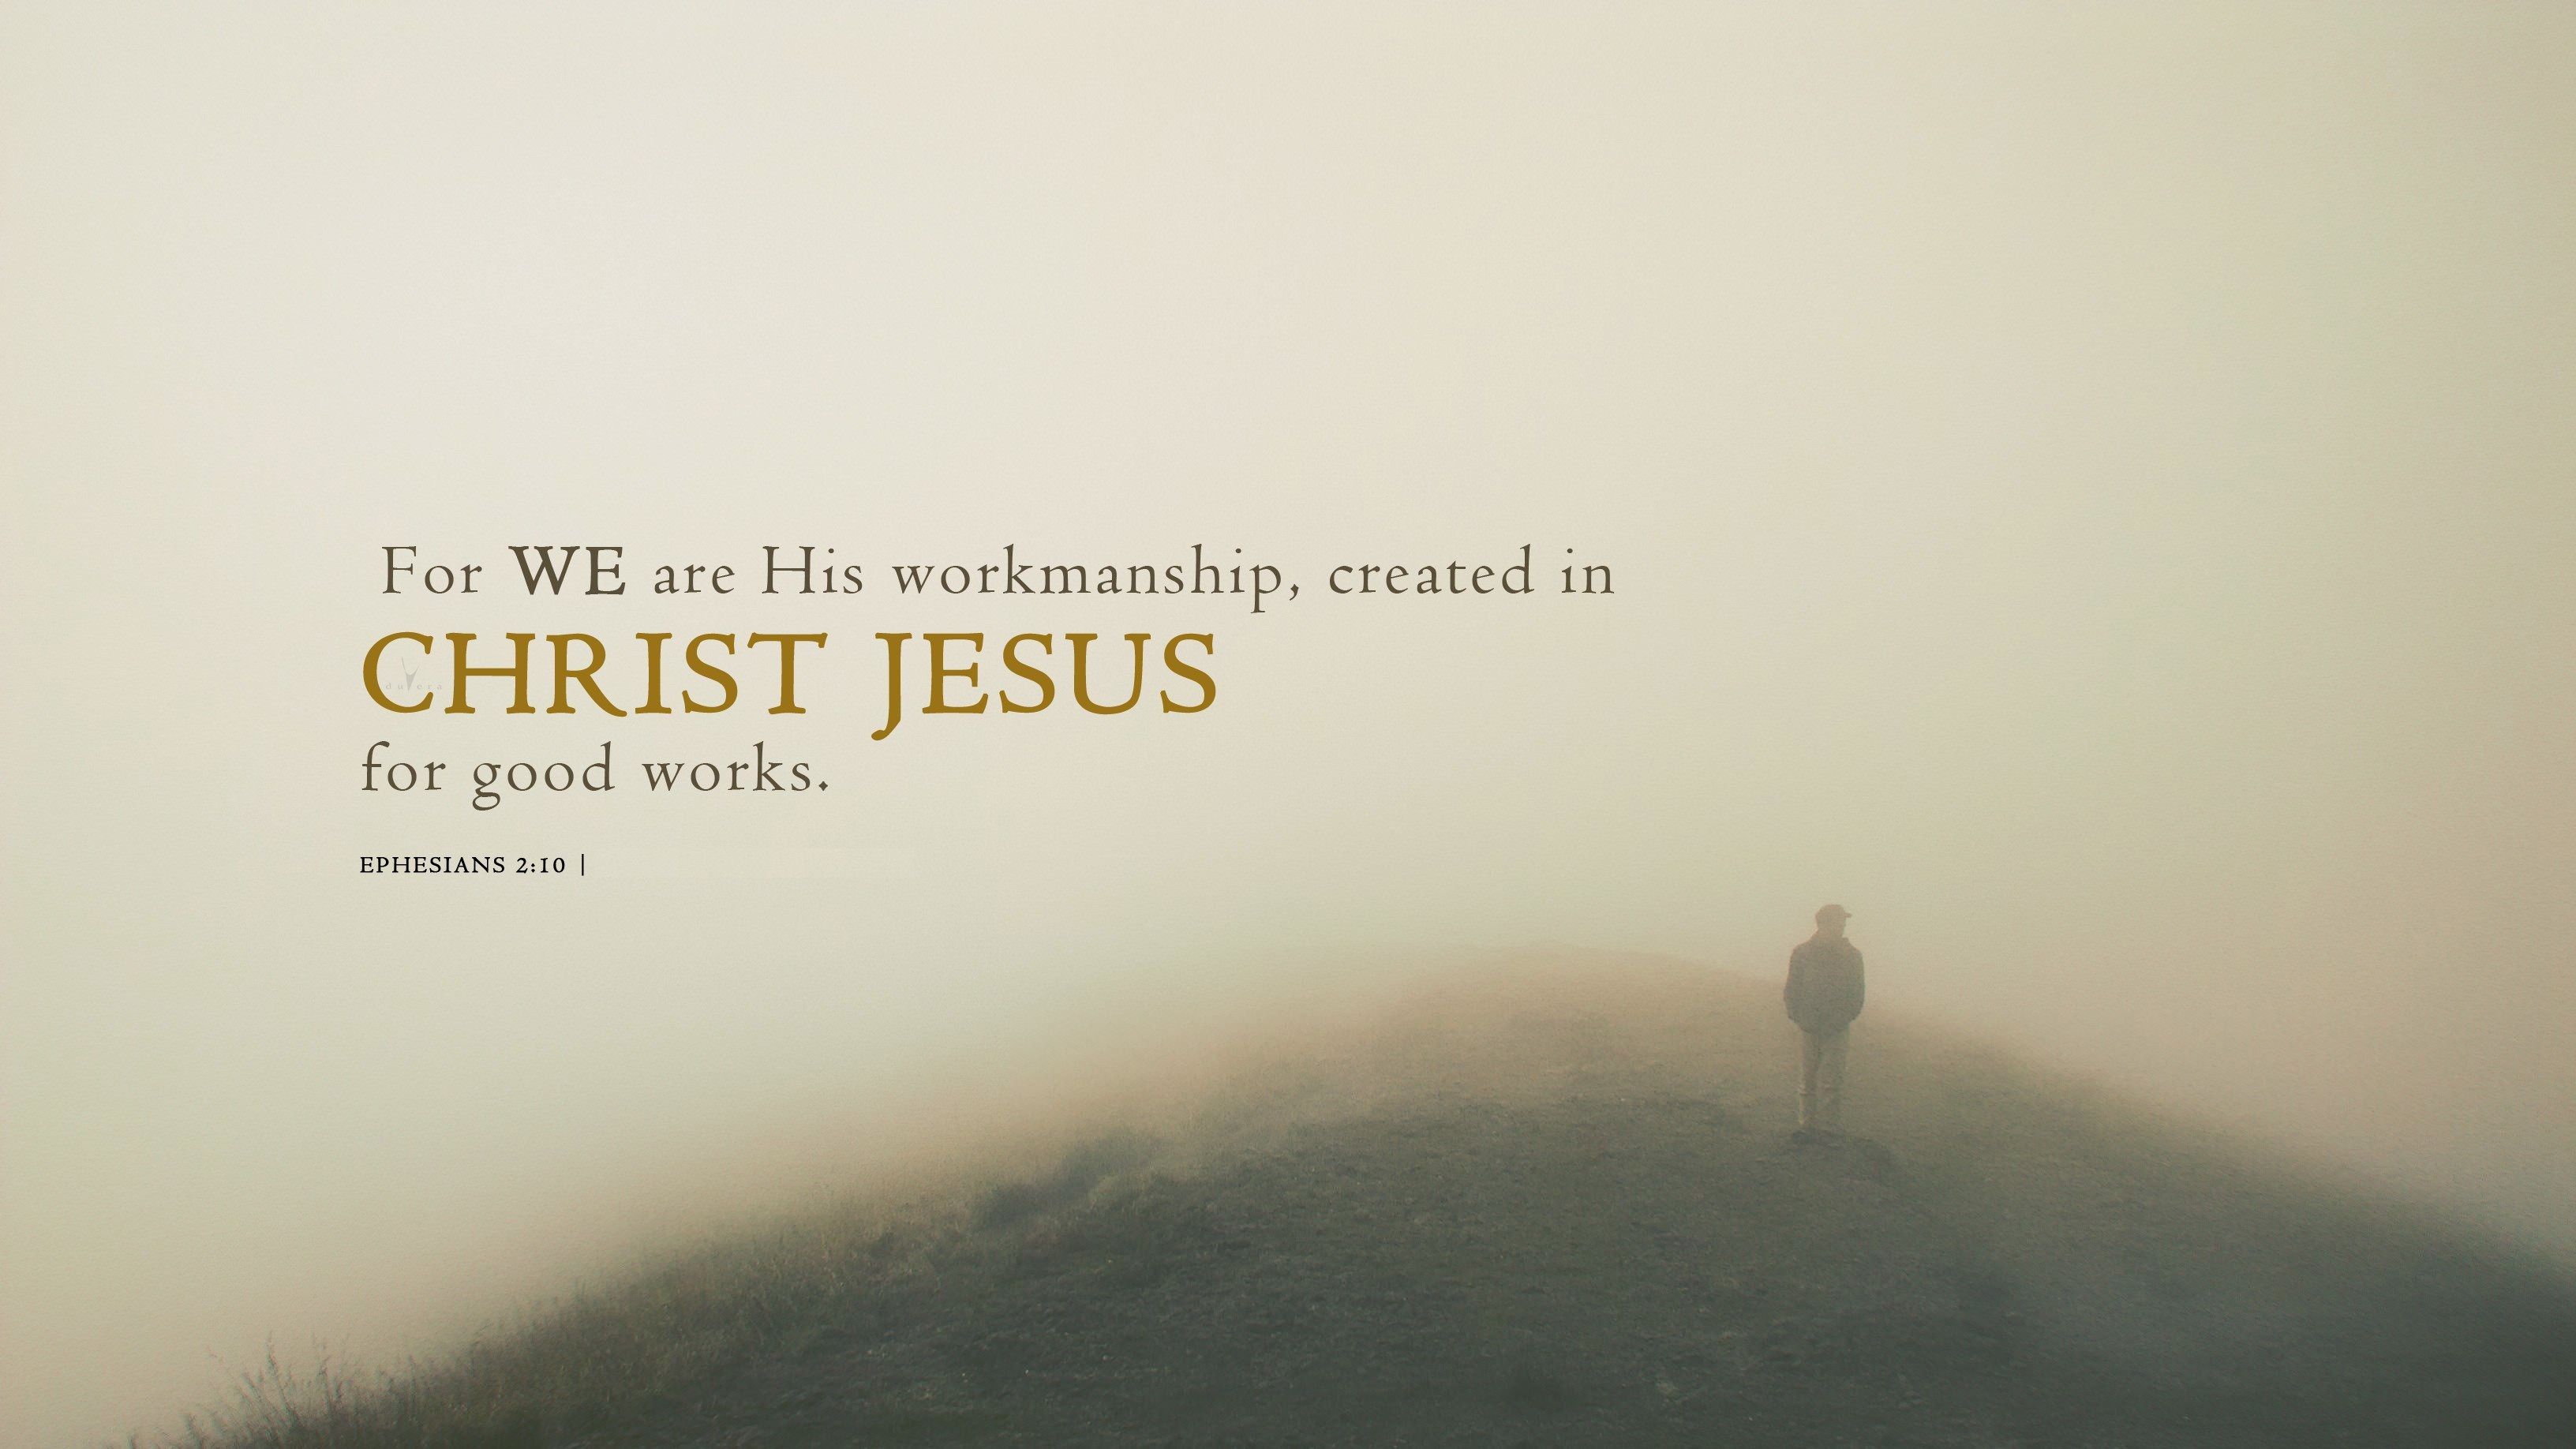 Ephesians 2:10 desktop wallpaper free download. Use on PC, Mac, Android, iPhone or any device you like. - Christian